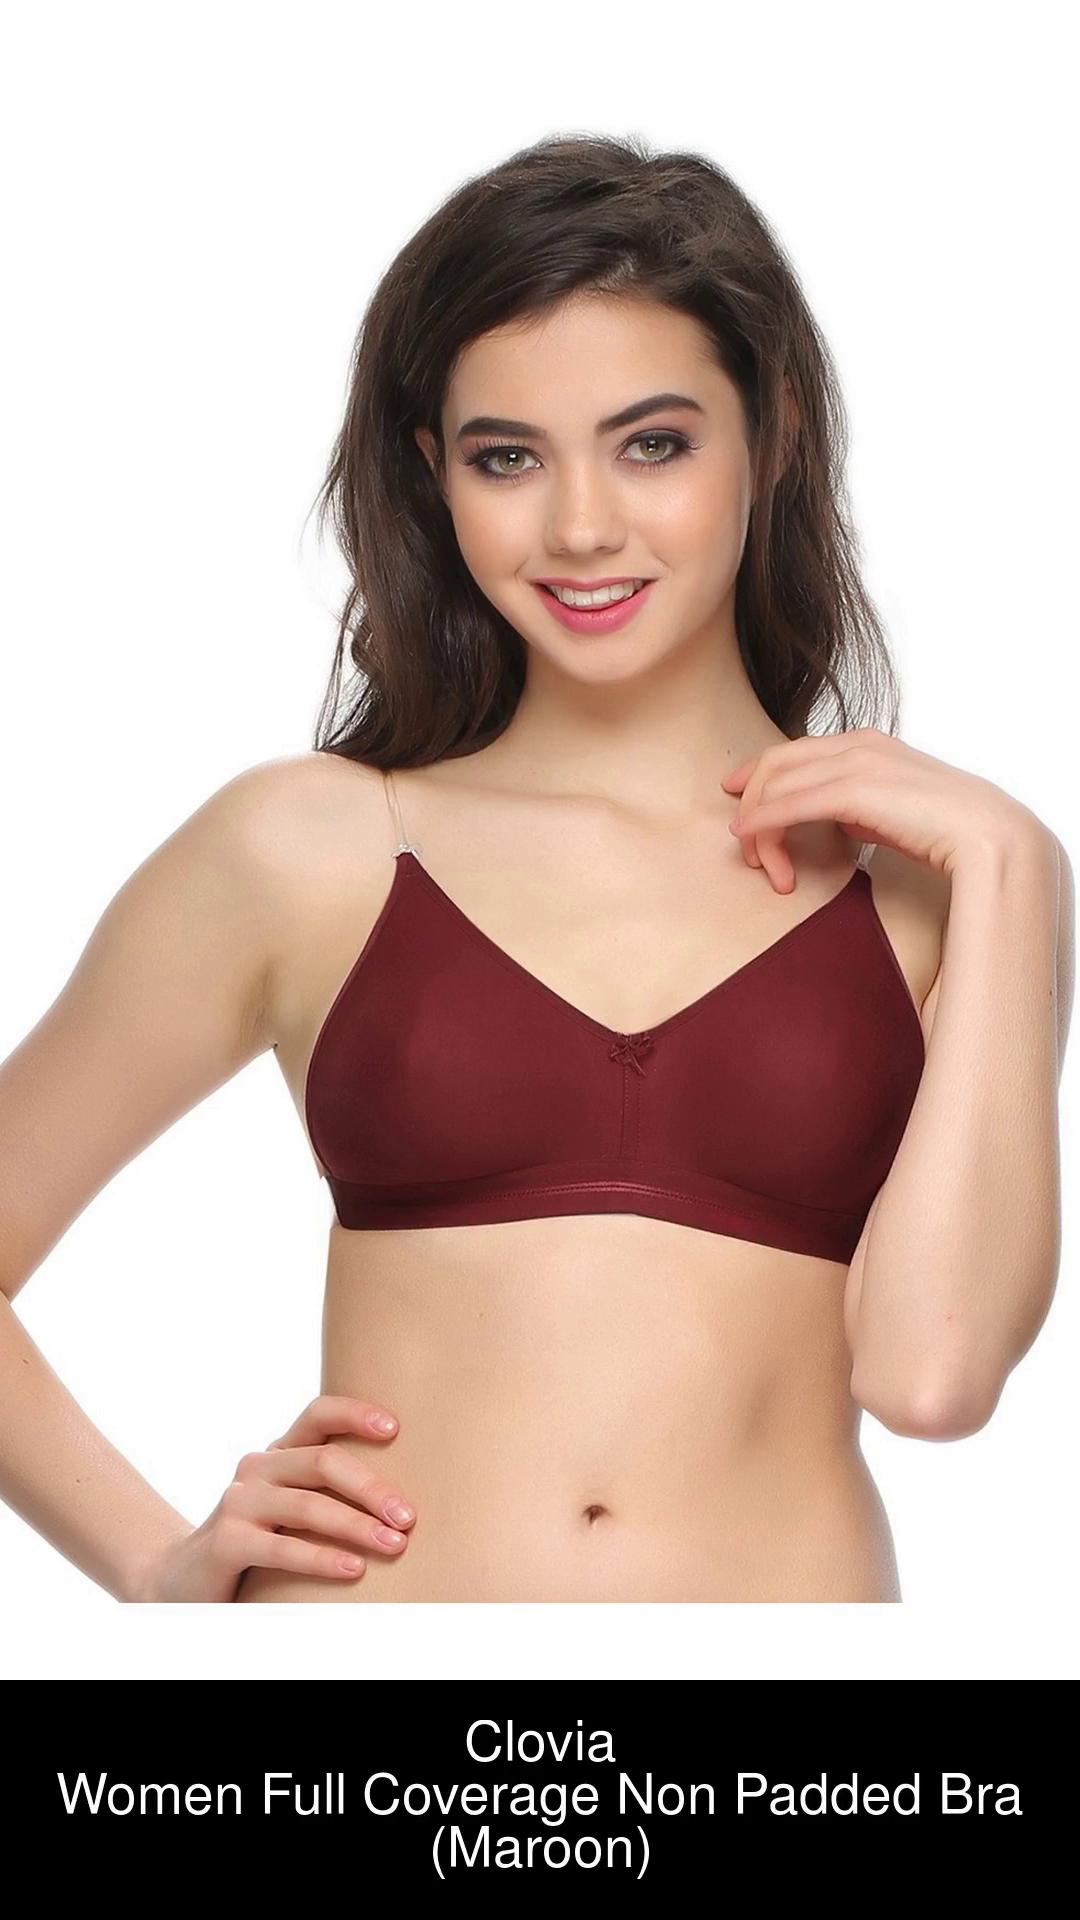 Clovia Cotton Rich Non-Wired T-Shirt Bra With Transparent Multiway Straps  Women Full Coverage Non Padded Bra - Buy Maroon Clovia Cotton Rich Non-Wired  T-Shirt Bra With Transparent Multiway Straps Women Full Coverage